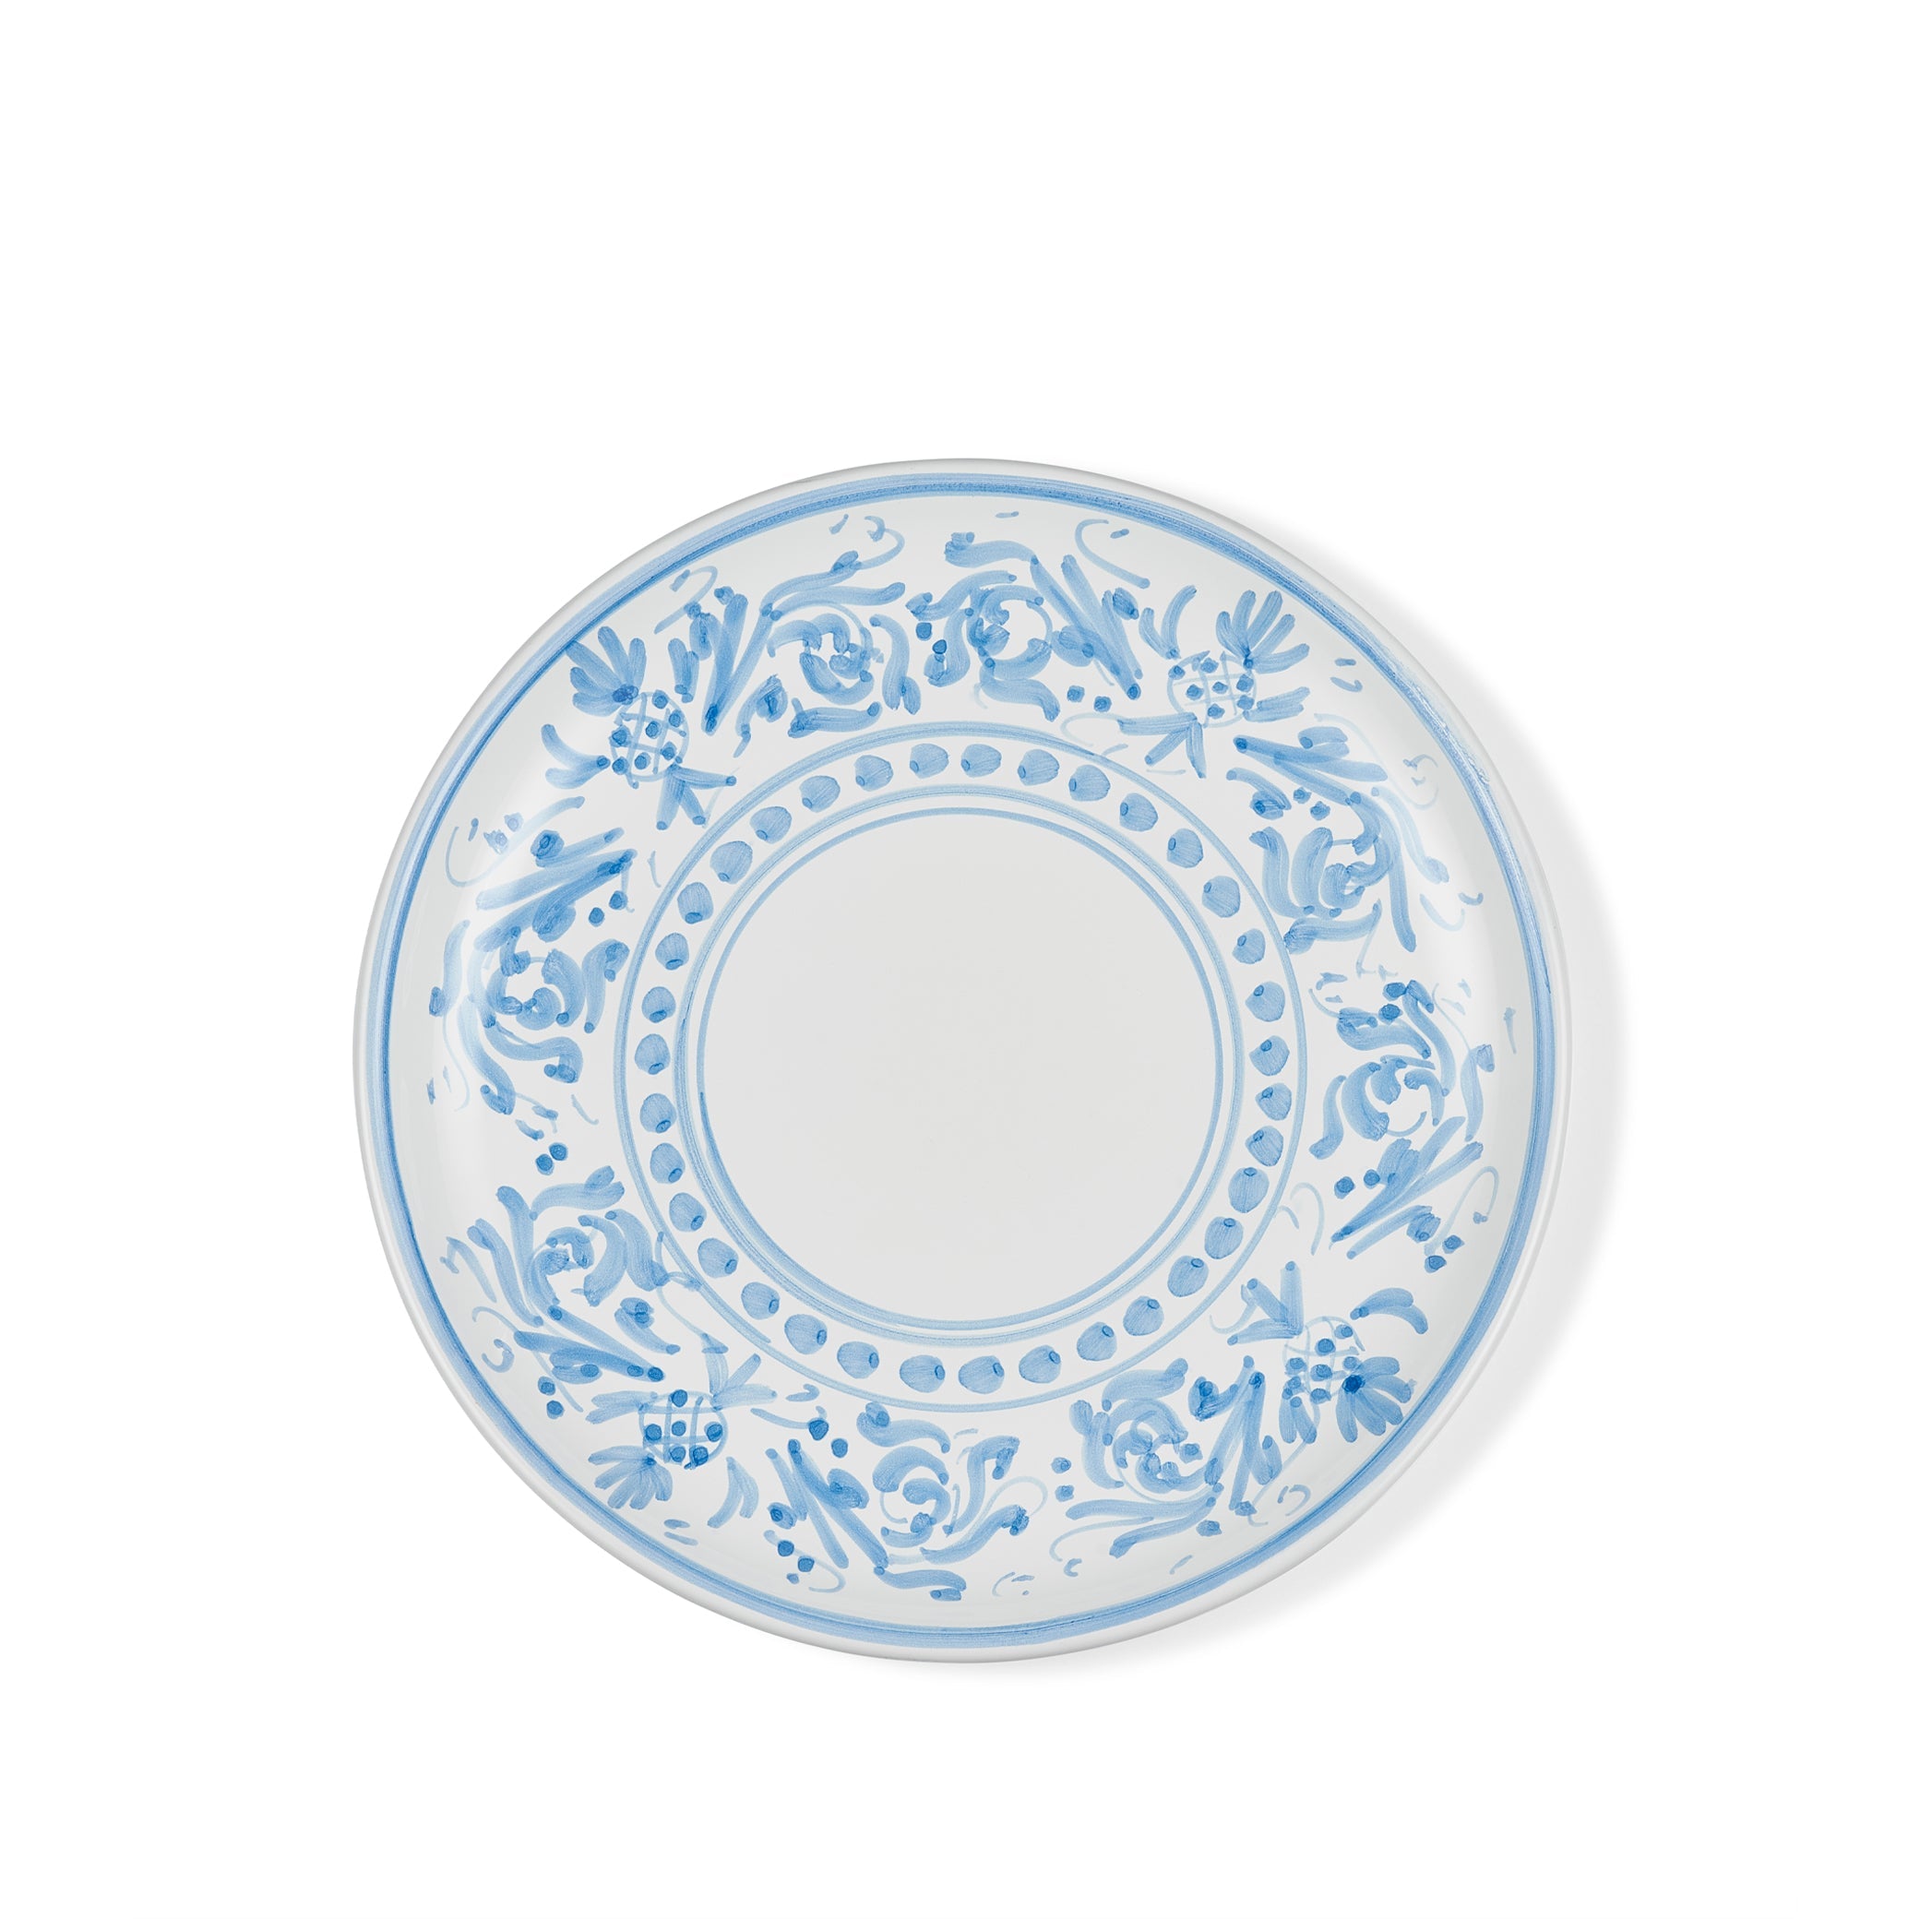 S&B Decorated Dinner Plate in White With Light Blue Pattern, 26cm